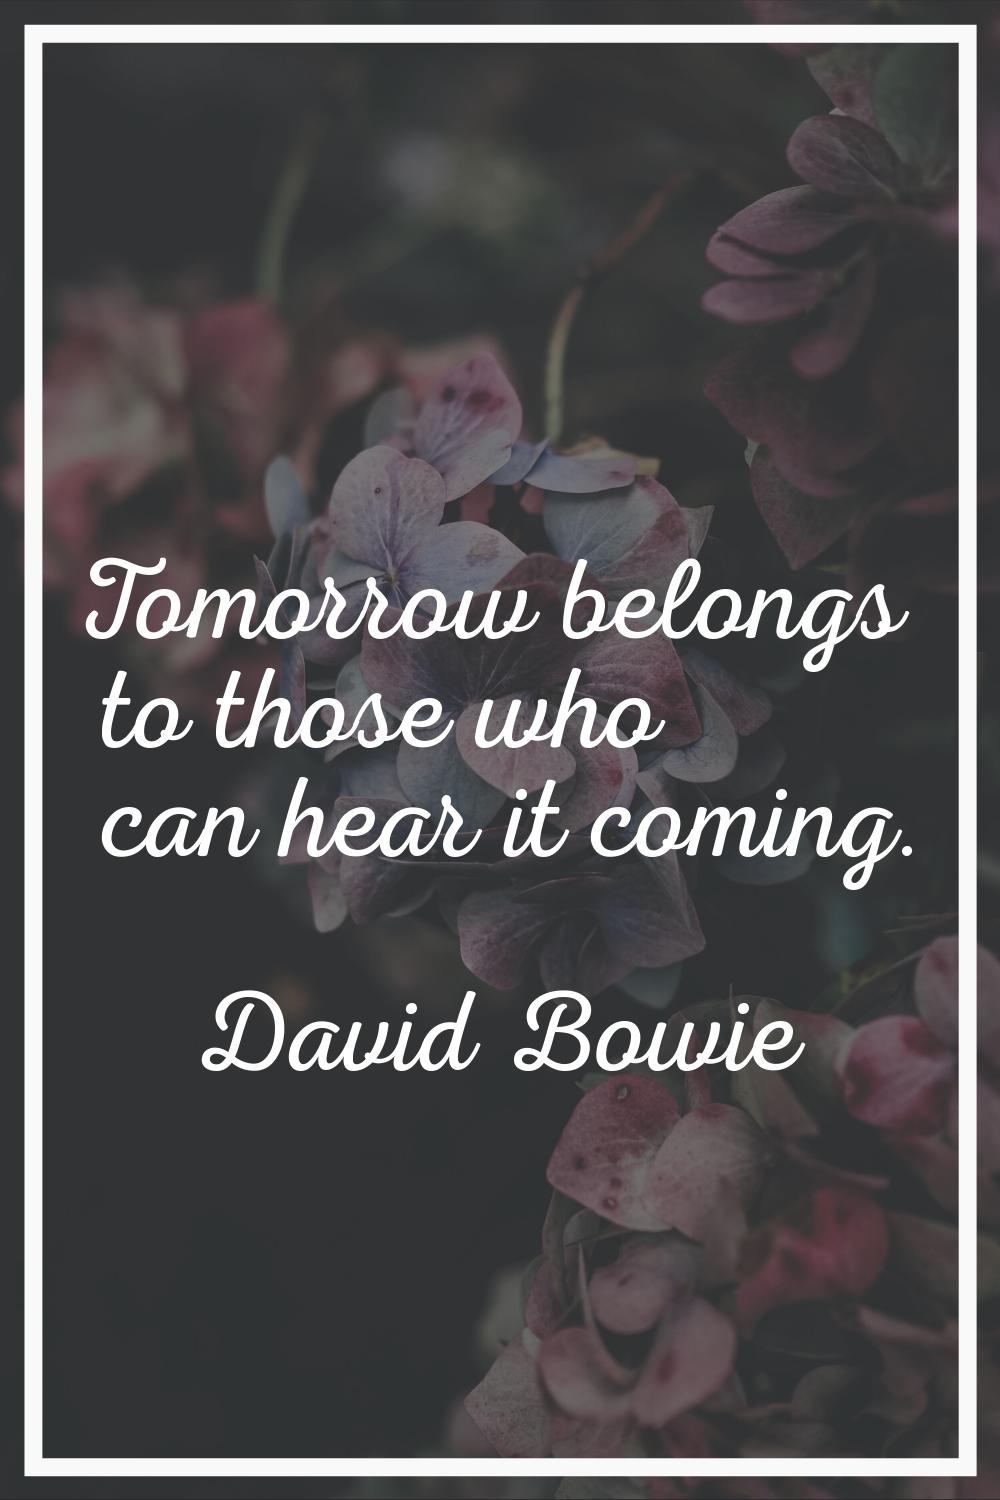 Tomorrow belongs to those who can hear it coming.